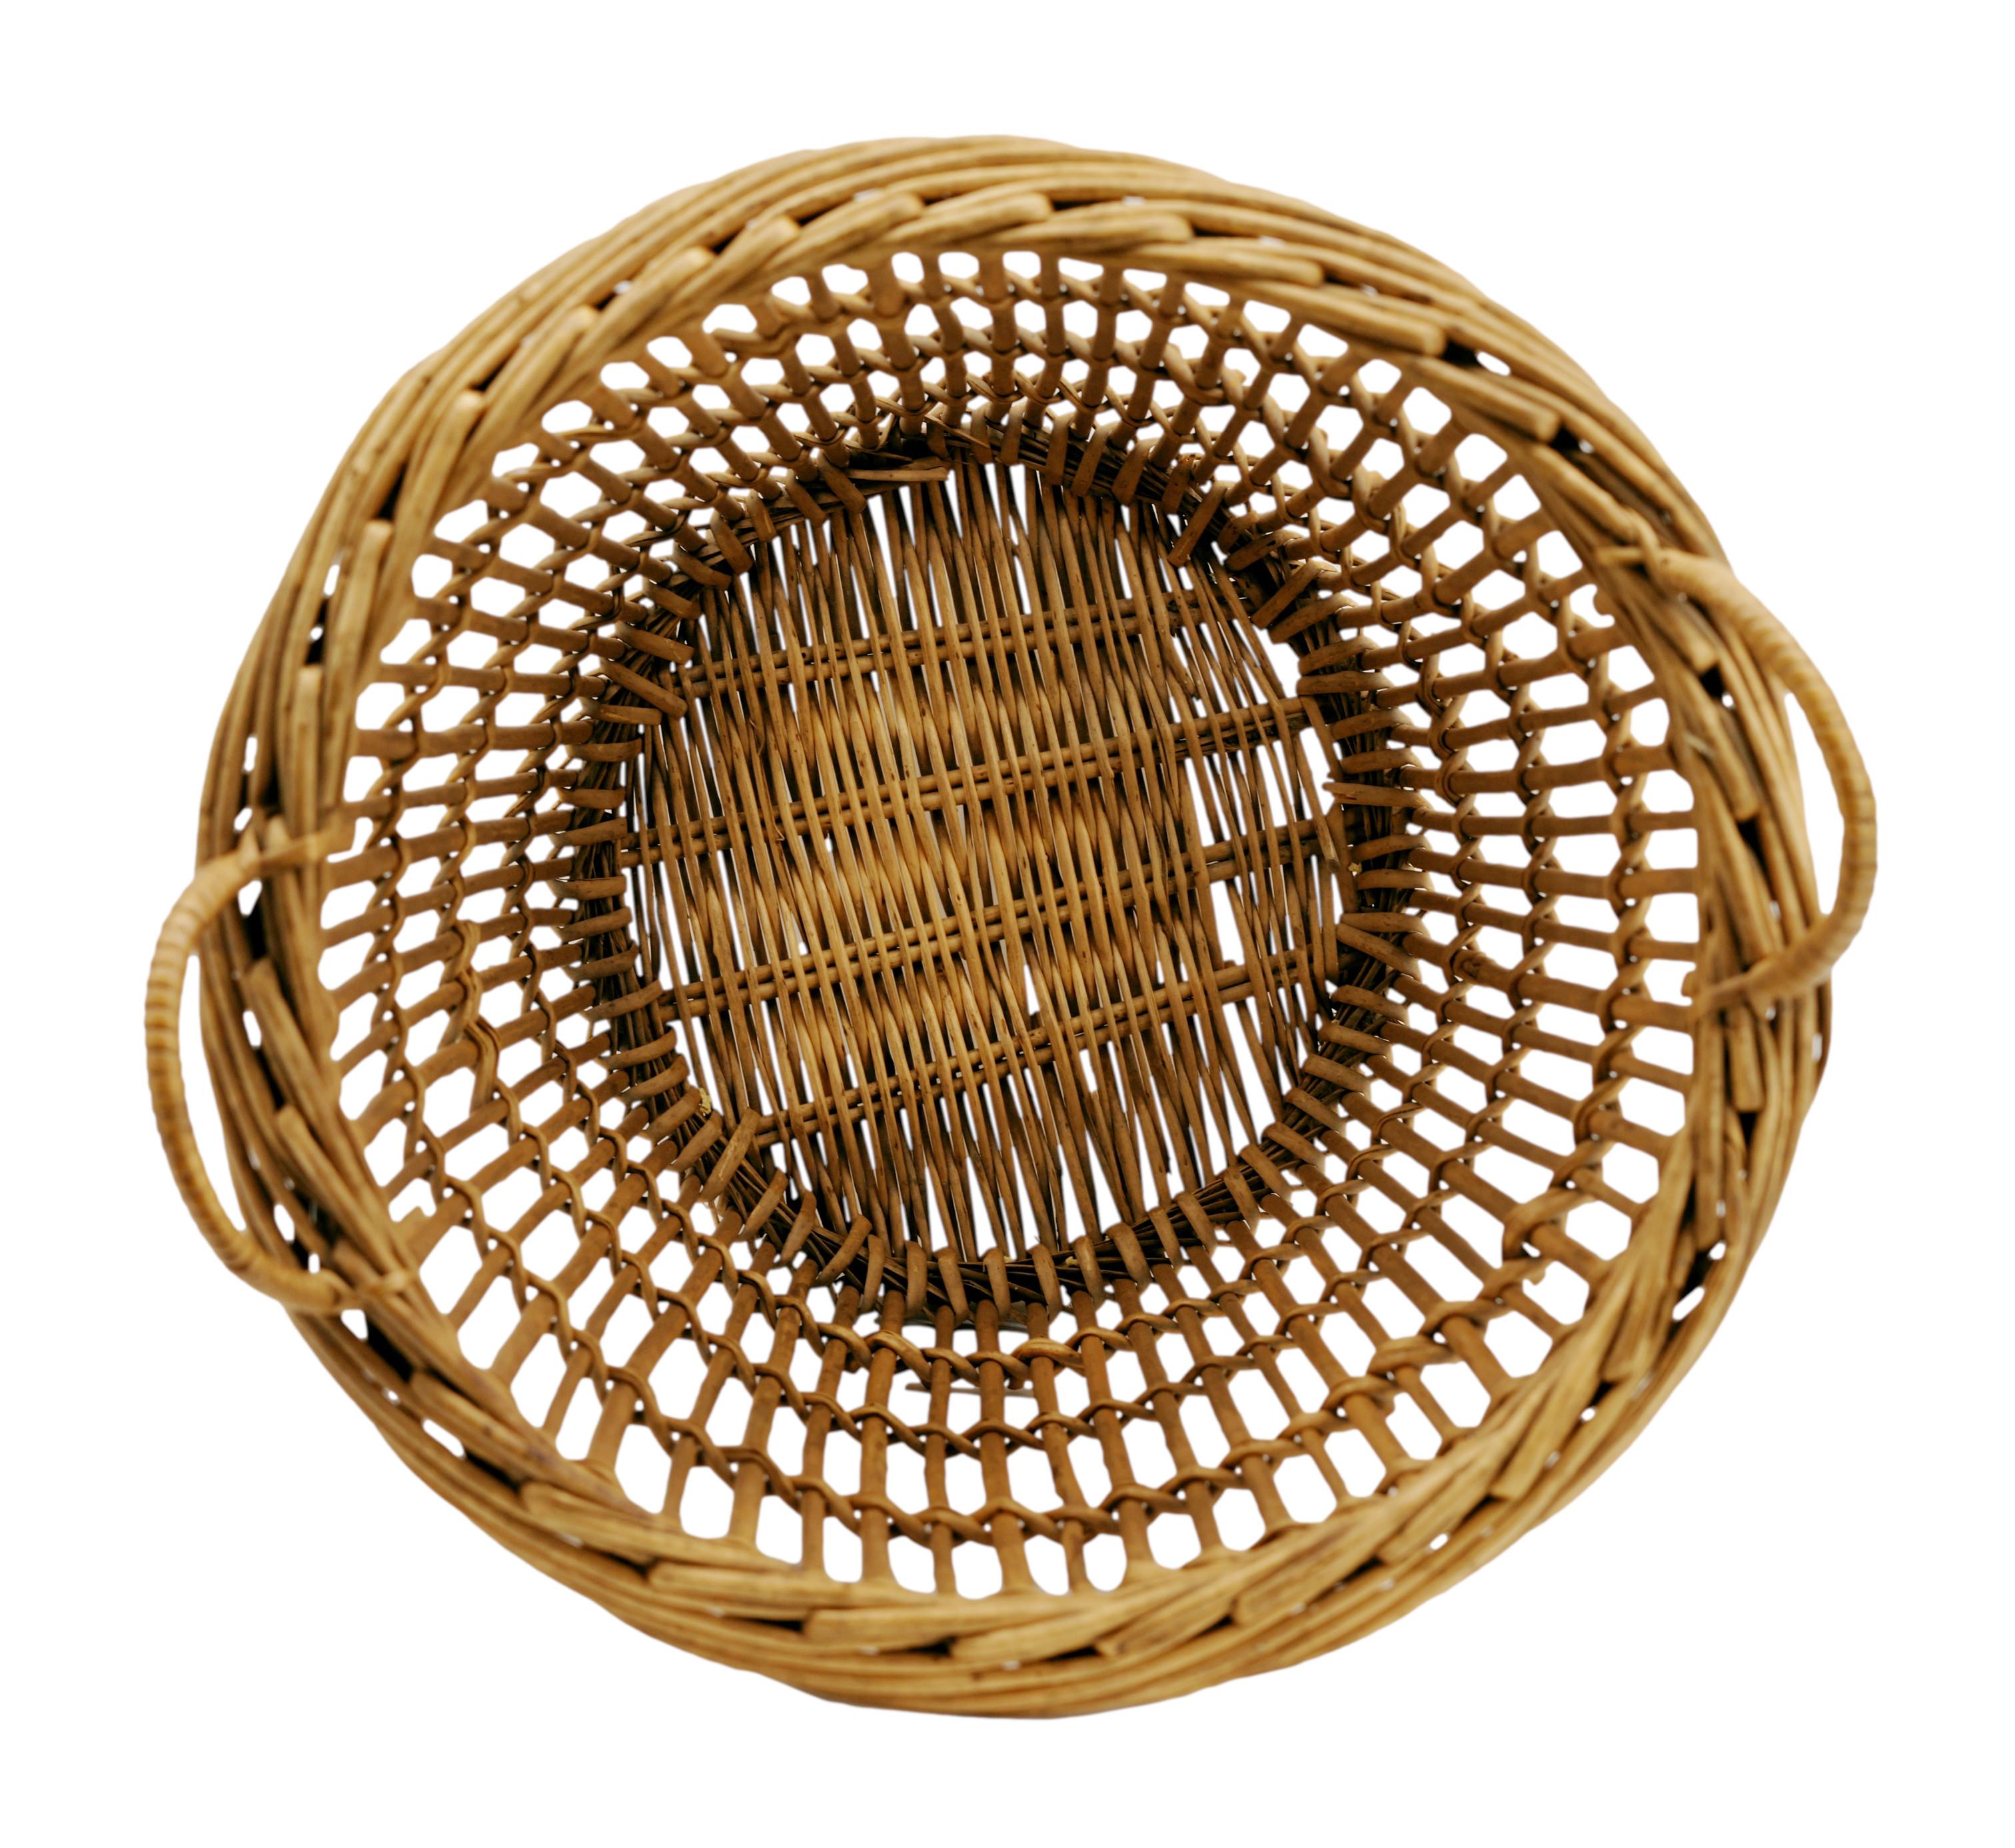 Mid-20th Century Bamboo & Rattan Trash Can or Paper Bin, 1950s